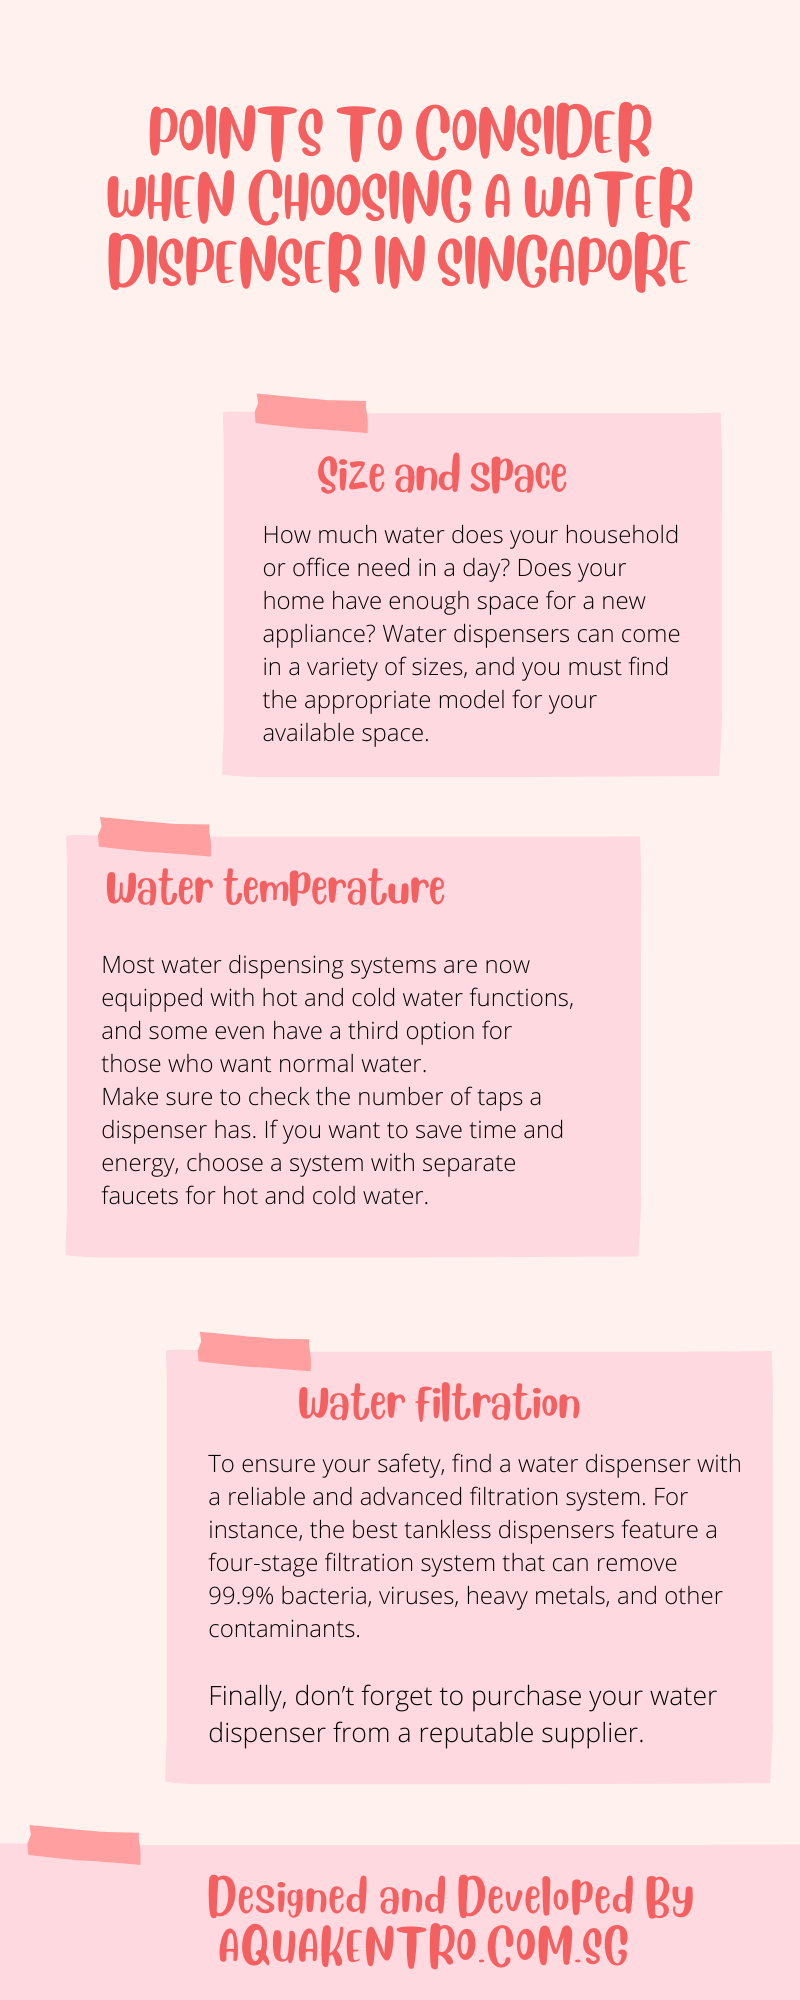 Points to Consider When Choosing a Water Dispenser in Singapore.png  by Aquakent